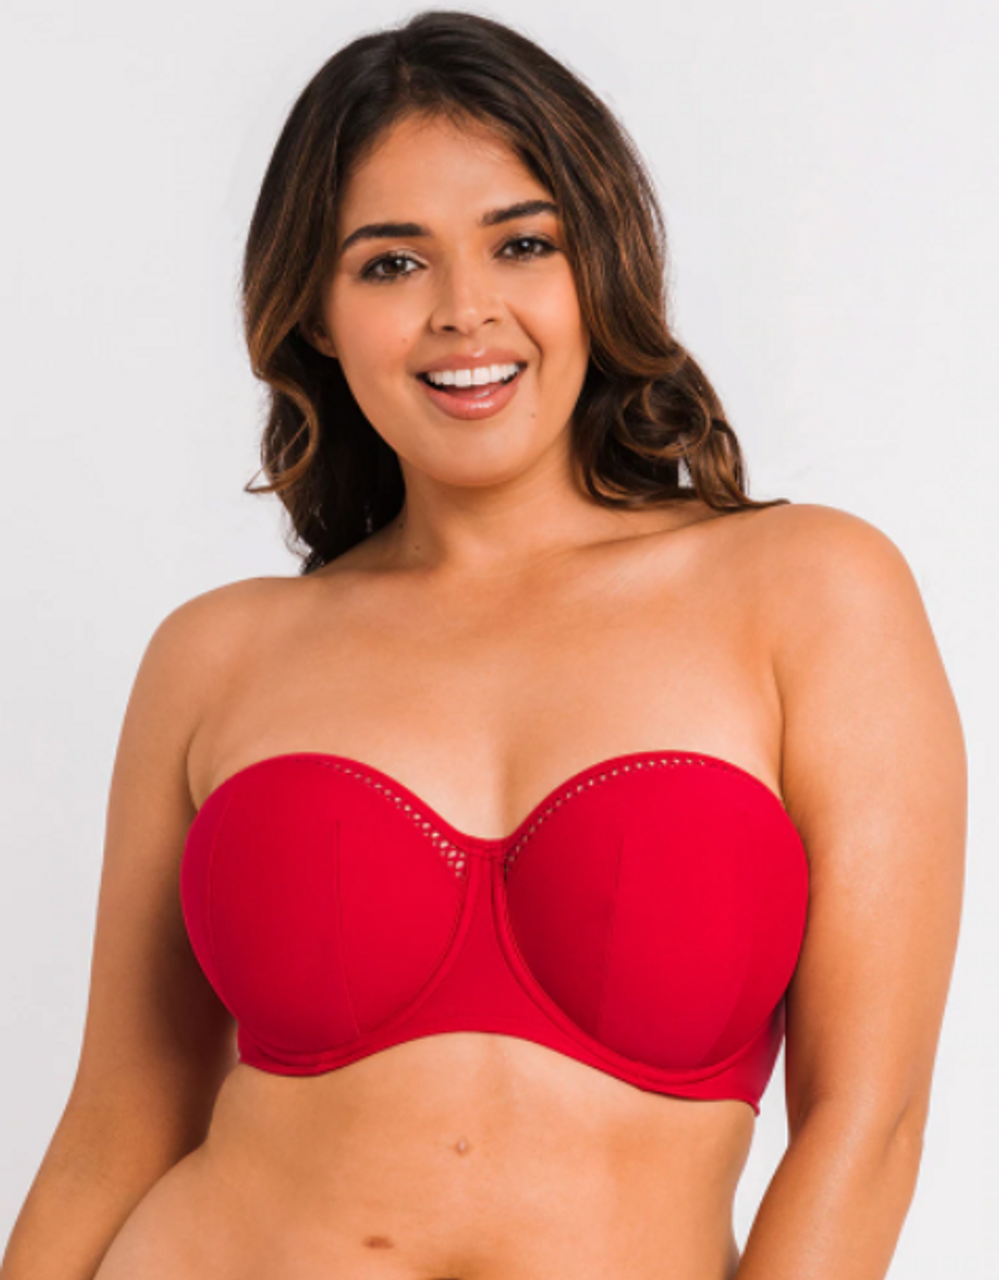 https://cdn11.bigcommerce.com/s-4ozhfndr18/images/stencil/1280x1280/products/5349/18825/first-class-bandeau-red-3__72587.1653240008.PNG?c=1